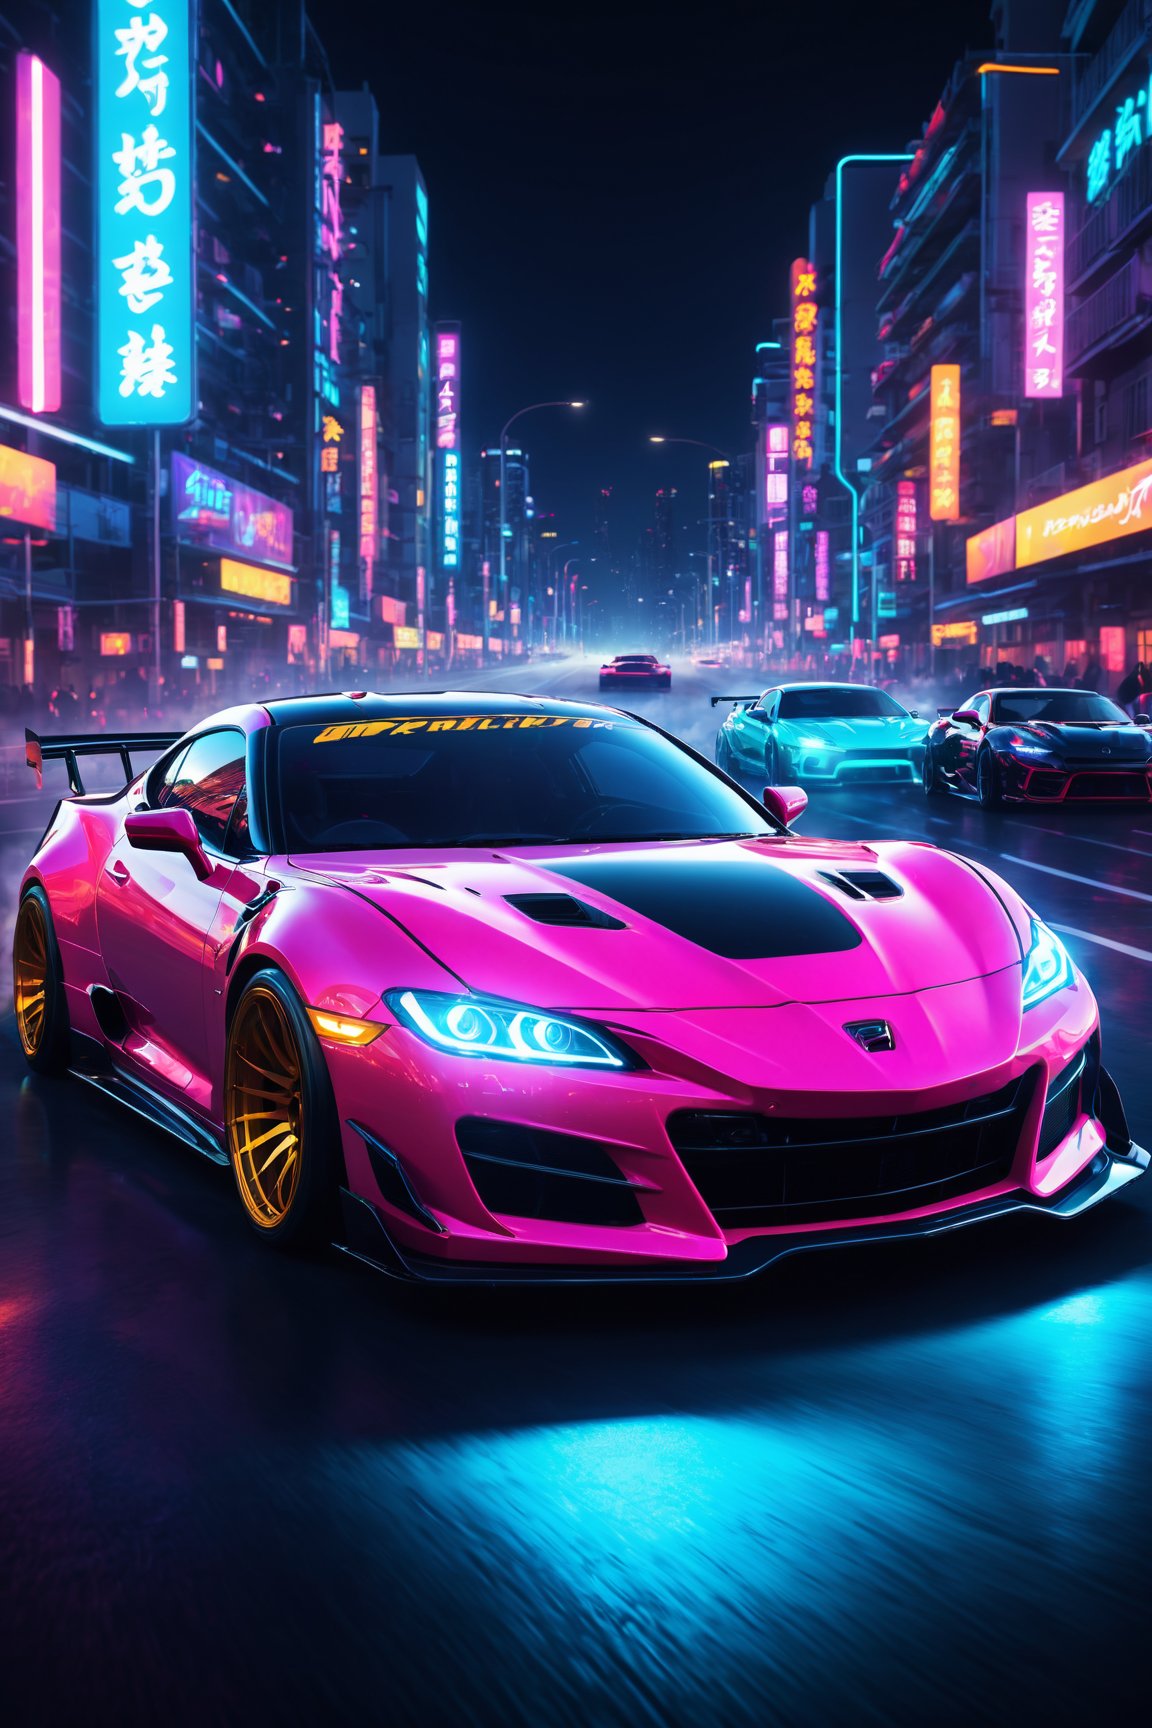 Anime-style street racer, neon-lit city, fast cars, drifting, adrenaline-fueled action, intense concentration, midnight speed